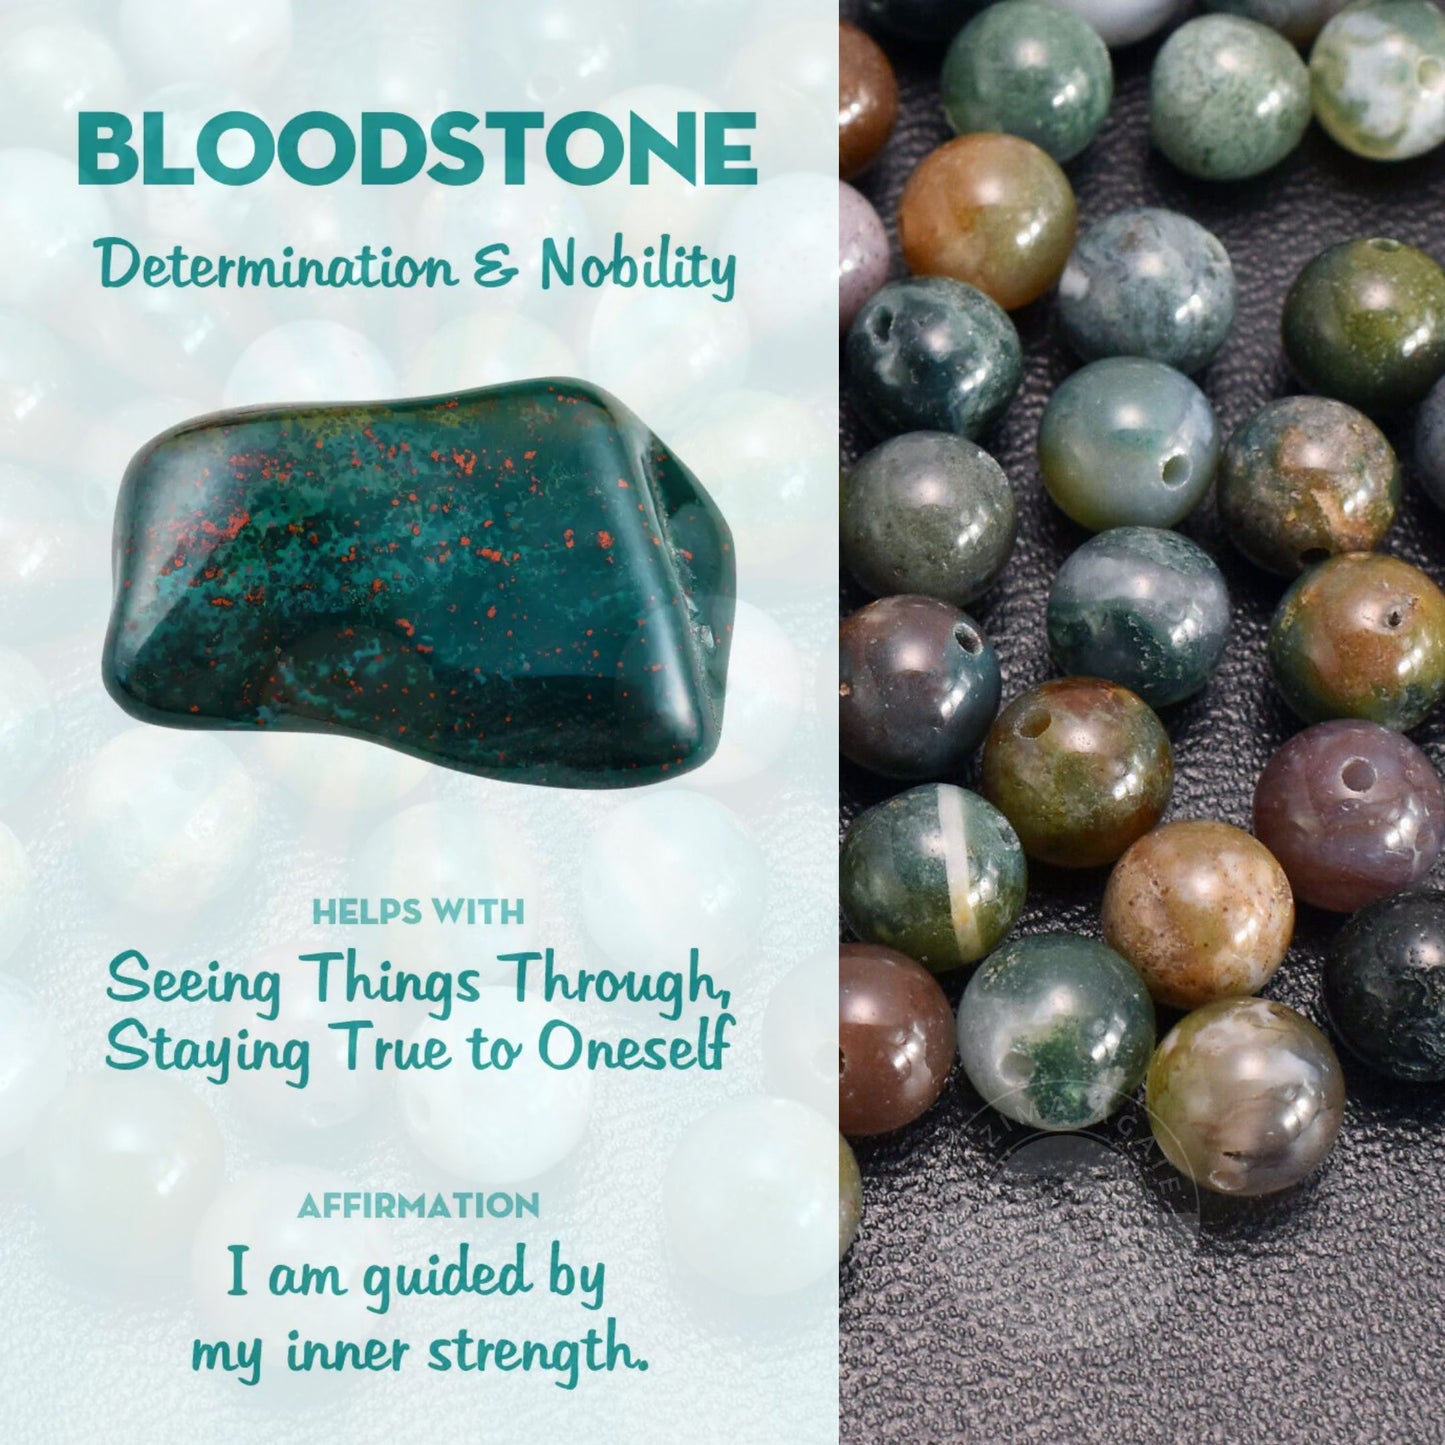 INDIAN BLOOD STONE LOOSE BEADS 8MM